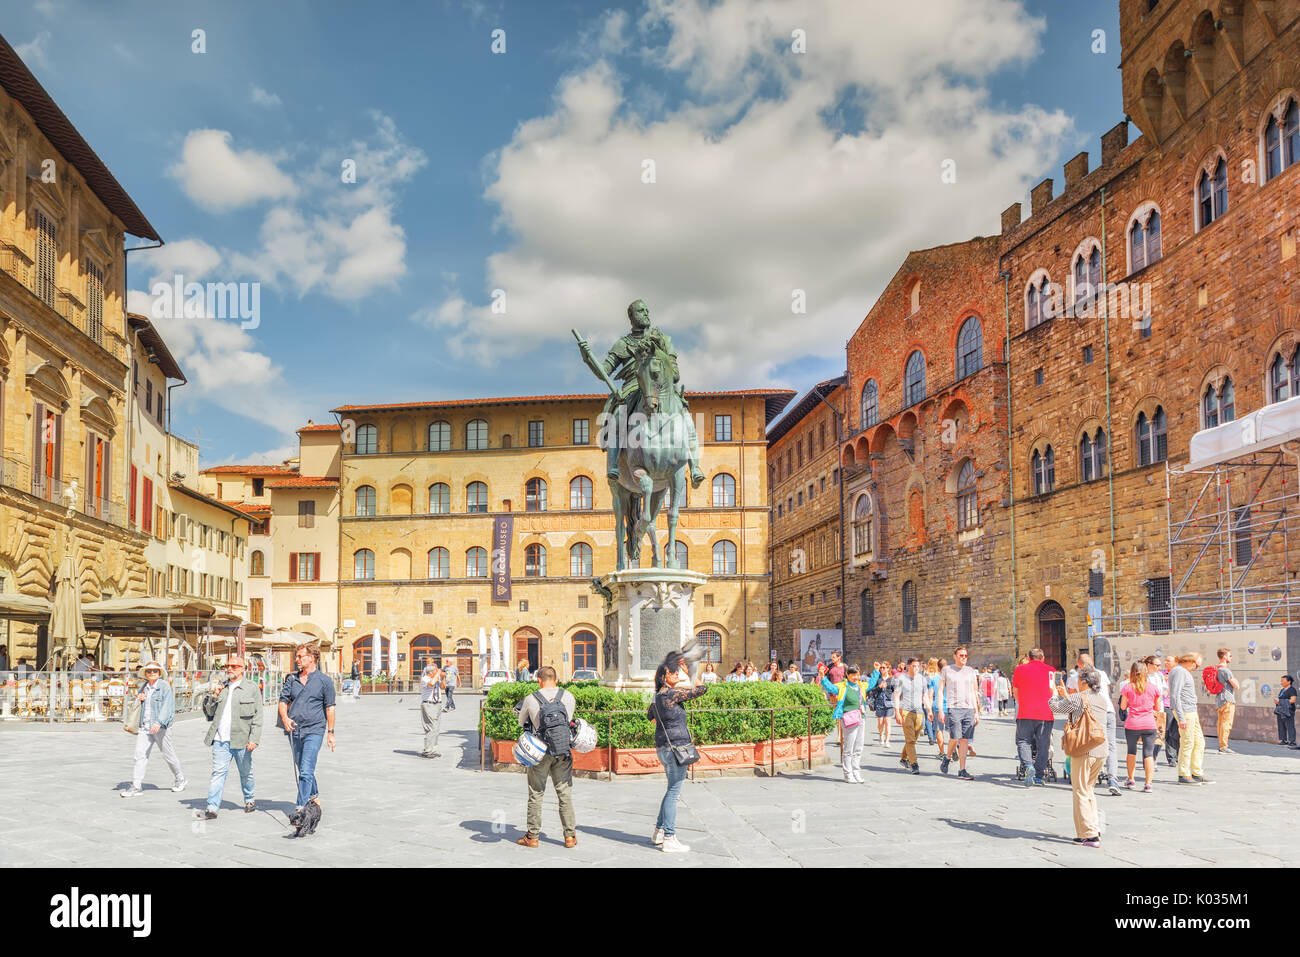 FLORENCE, ITALY- MAY 14, 2017: Square of Signoria (Piazza della Signoria) L-shaped square in front of the Palazzo Vecchio palace in Florence with tour Stock Photo